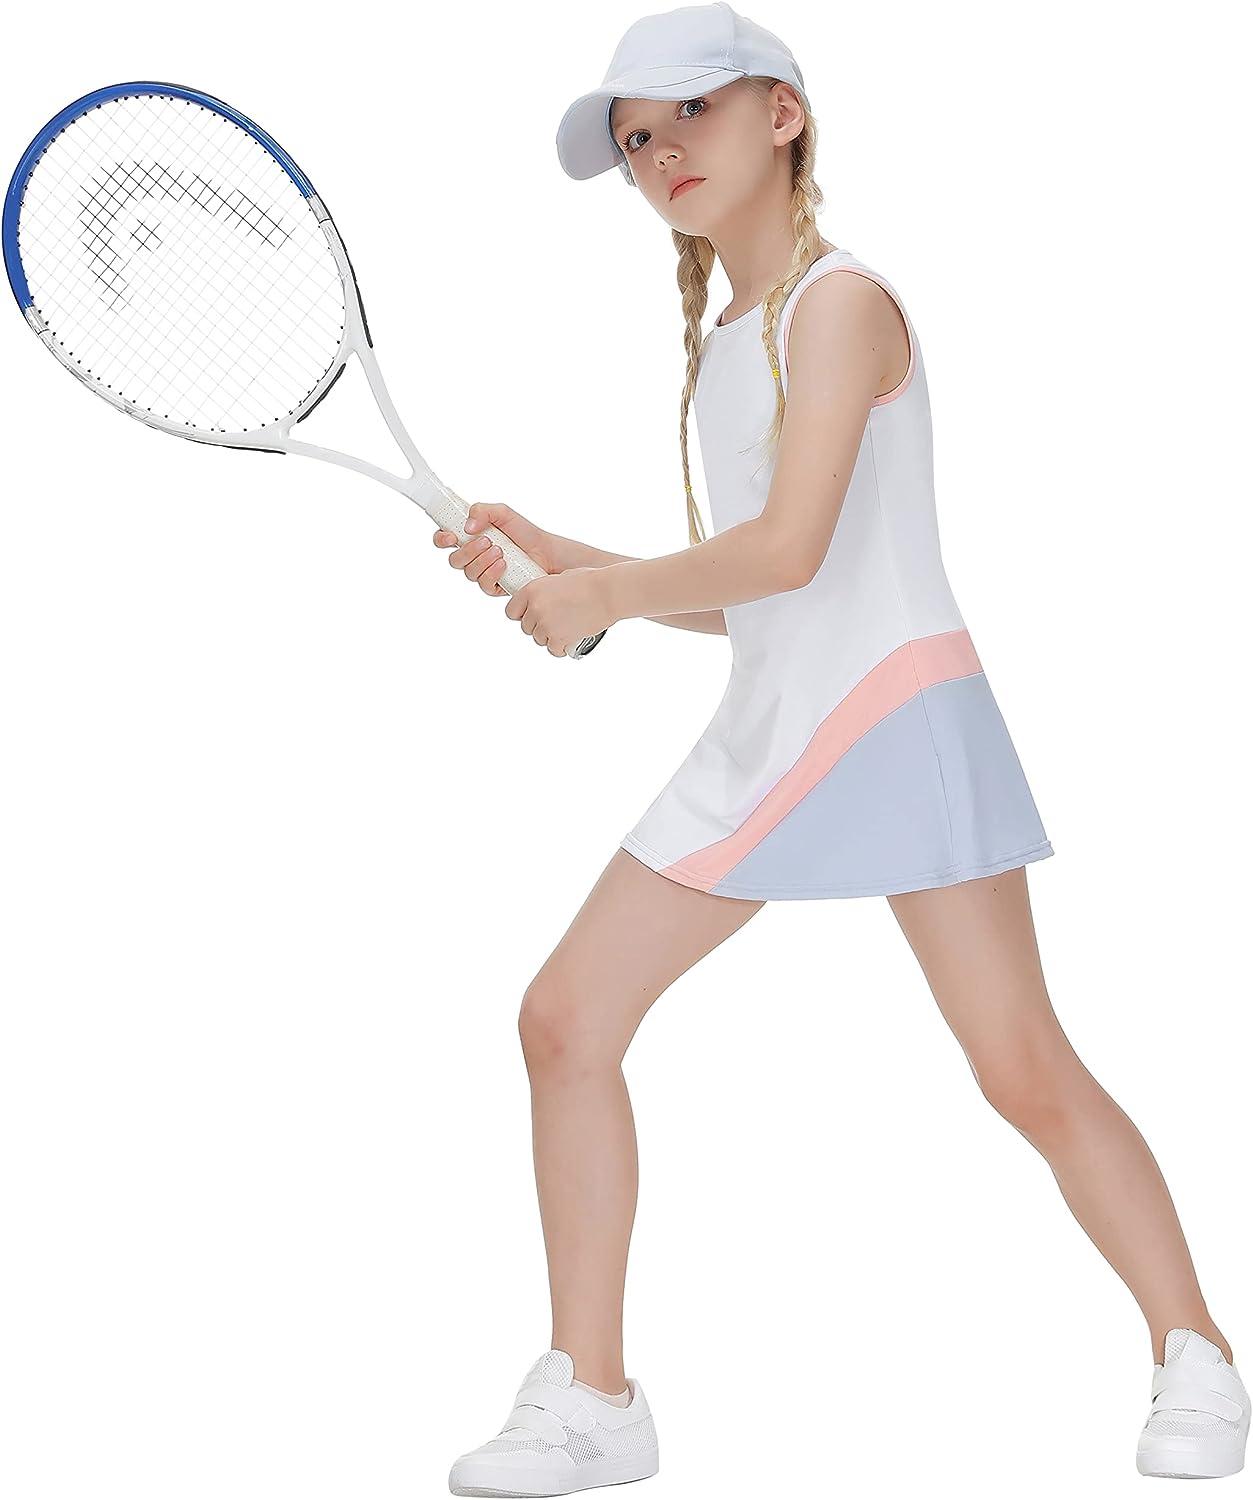 JACK SMITH Youth Girls Tennis Dresses with Shorts Golf Sleeveless Outfit  School Sports Dress Pockets